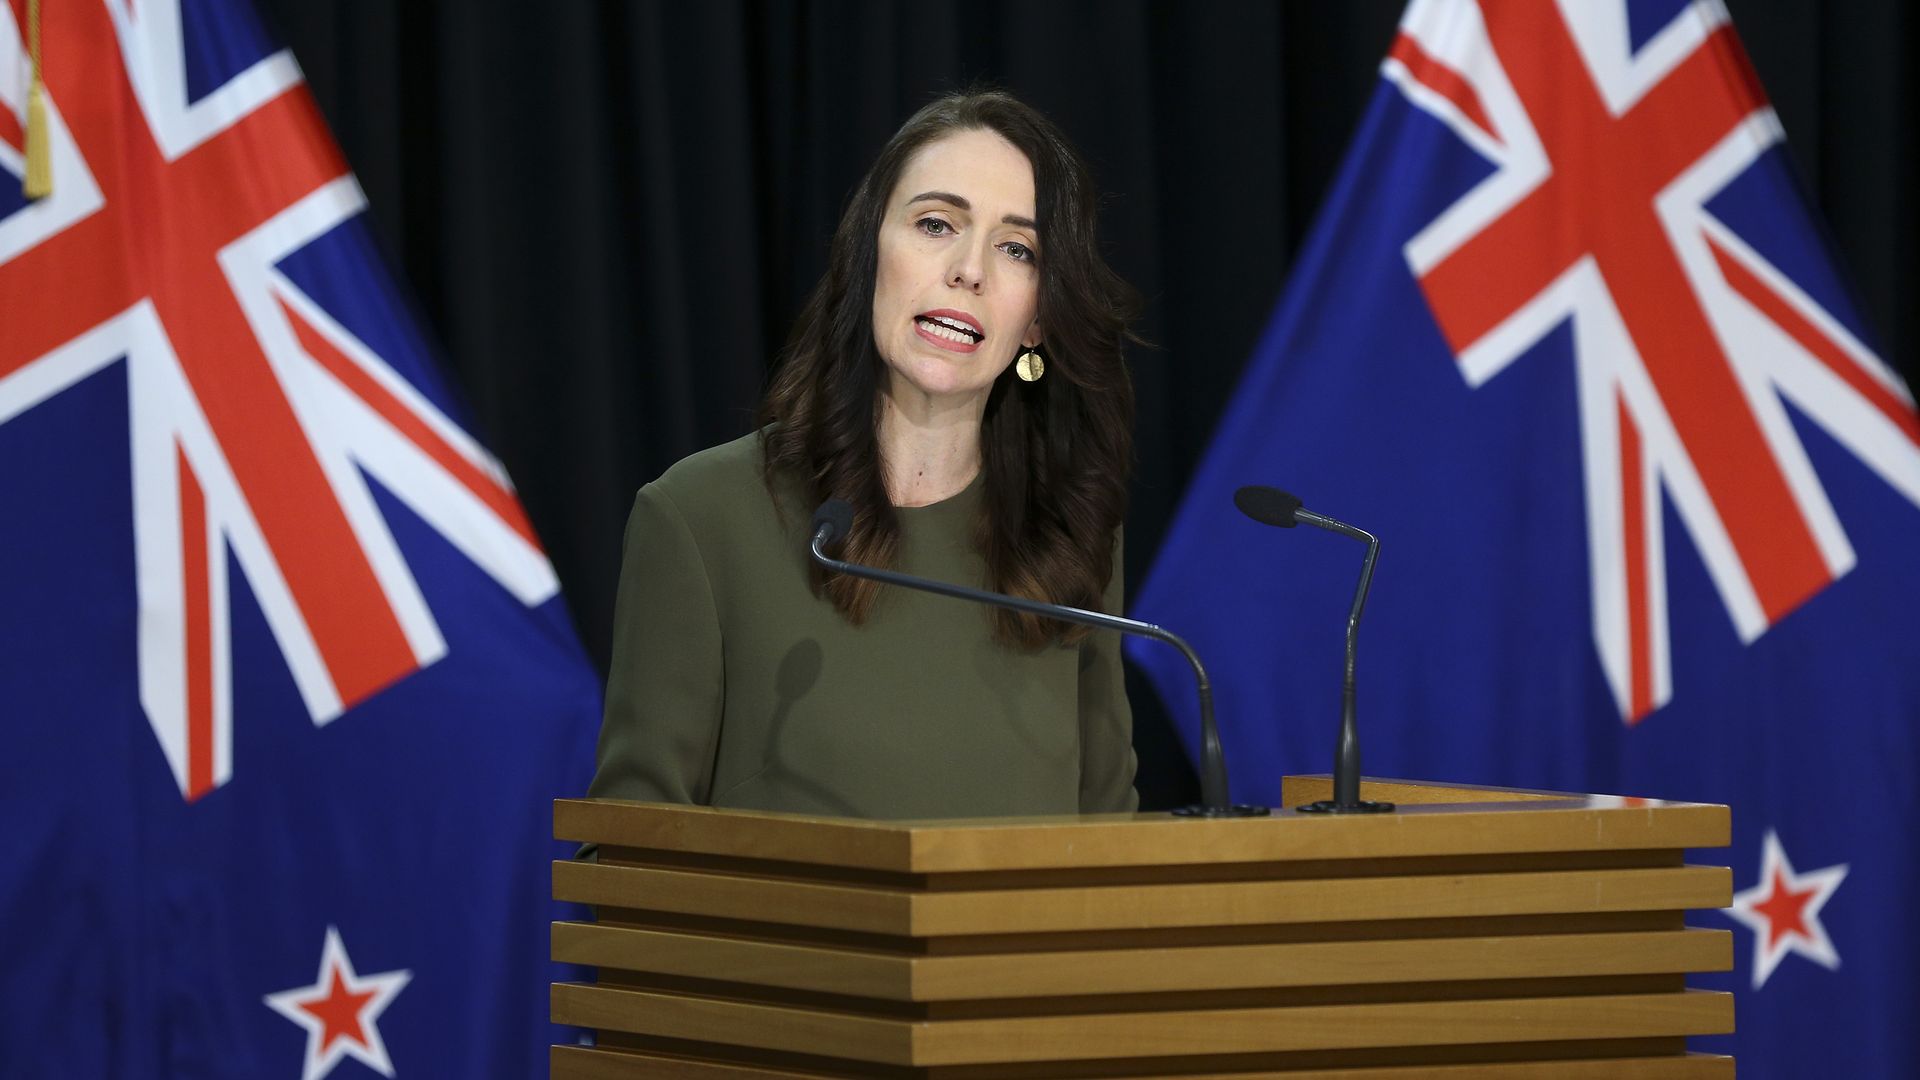 New Zealand Prime Minister Jacinda Ardern attends a press conference held in the parliament building Beehive in Wellington, New Zealand, on Aug. 17